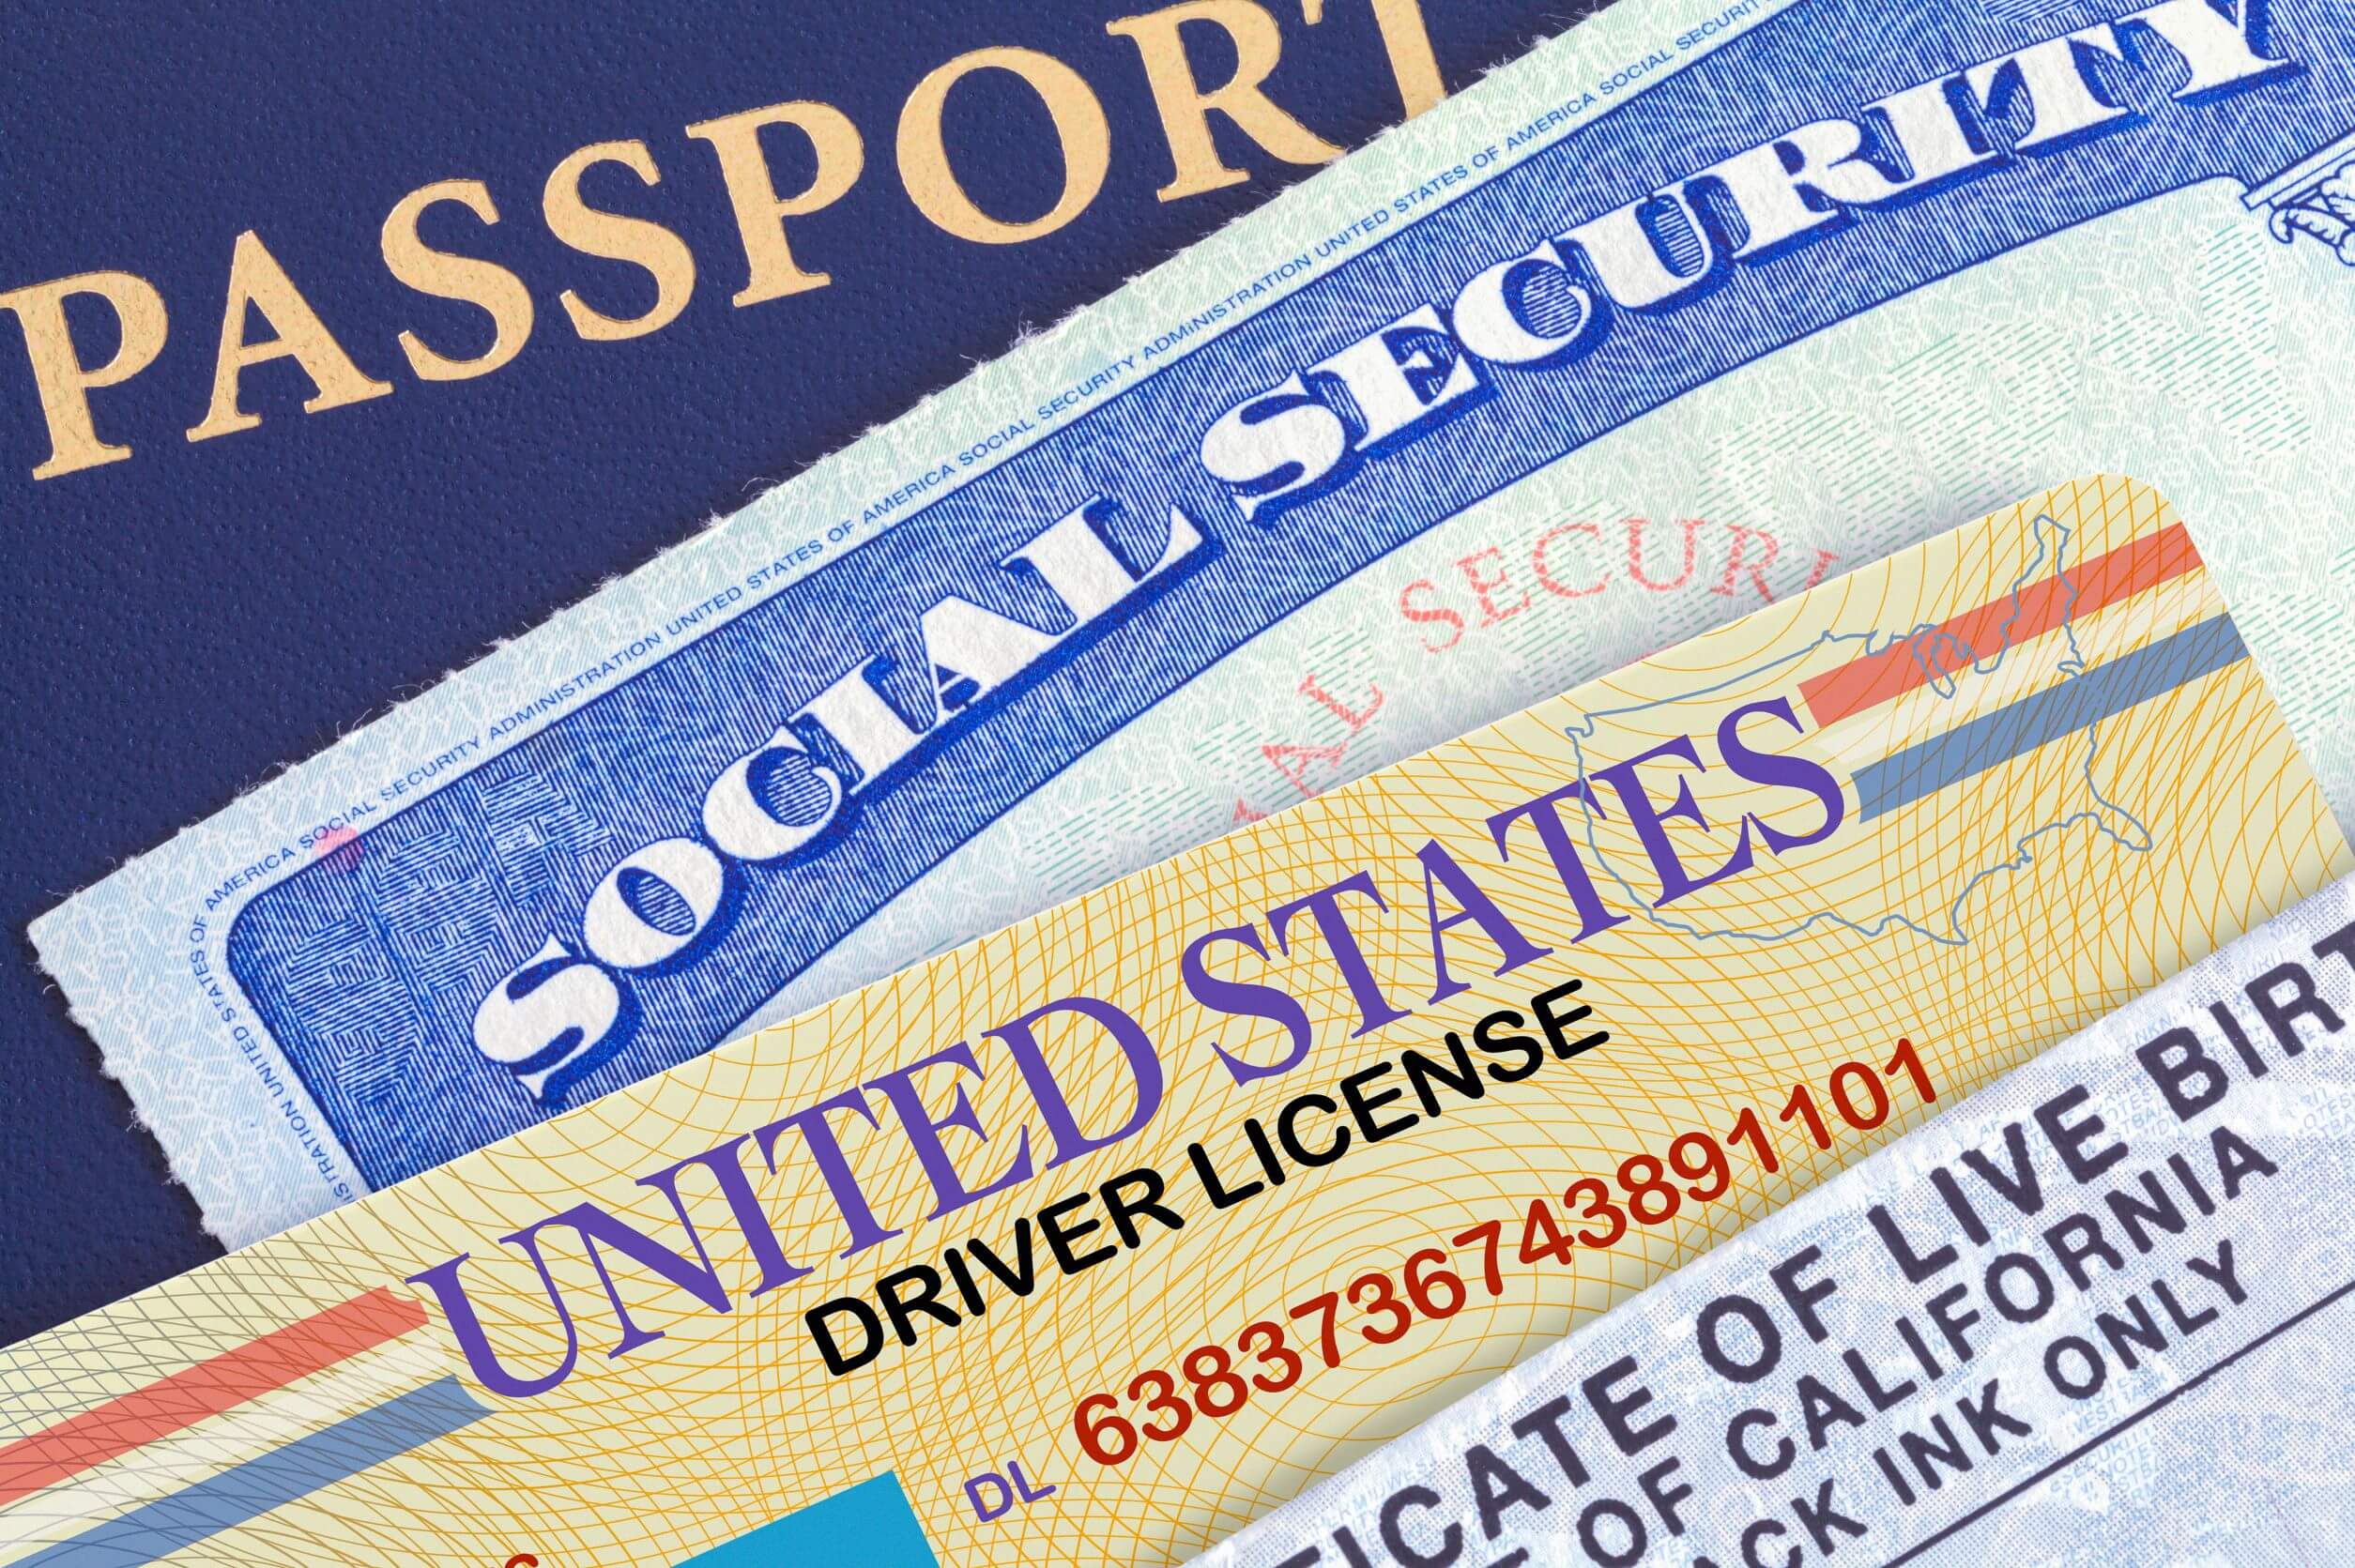 Passport, Social Security card. and driver's license